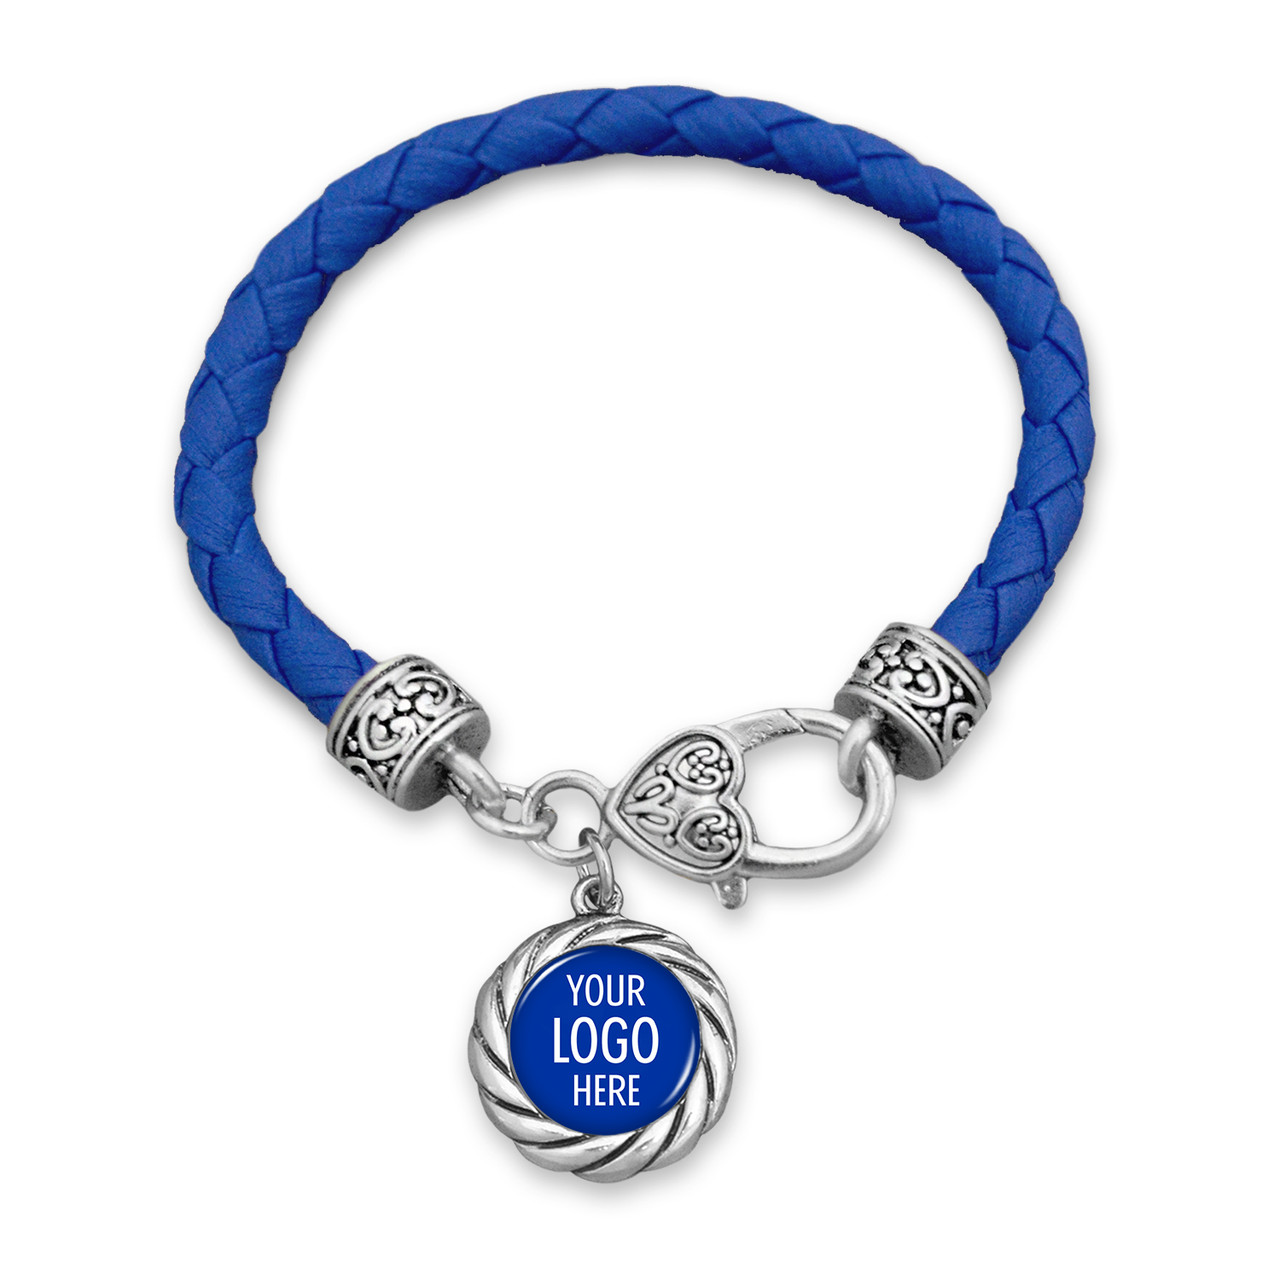 High School Team Color Leather Bracelet- Twisted Rope Charm